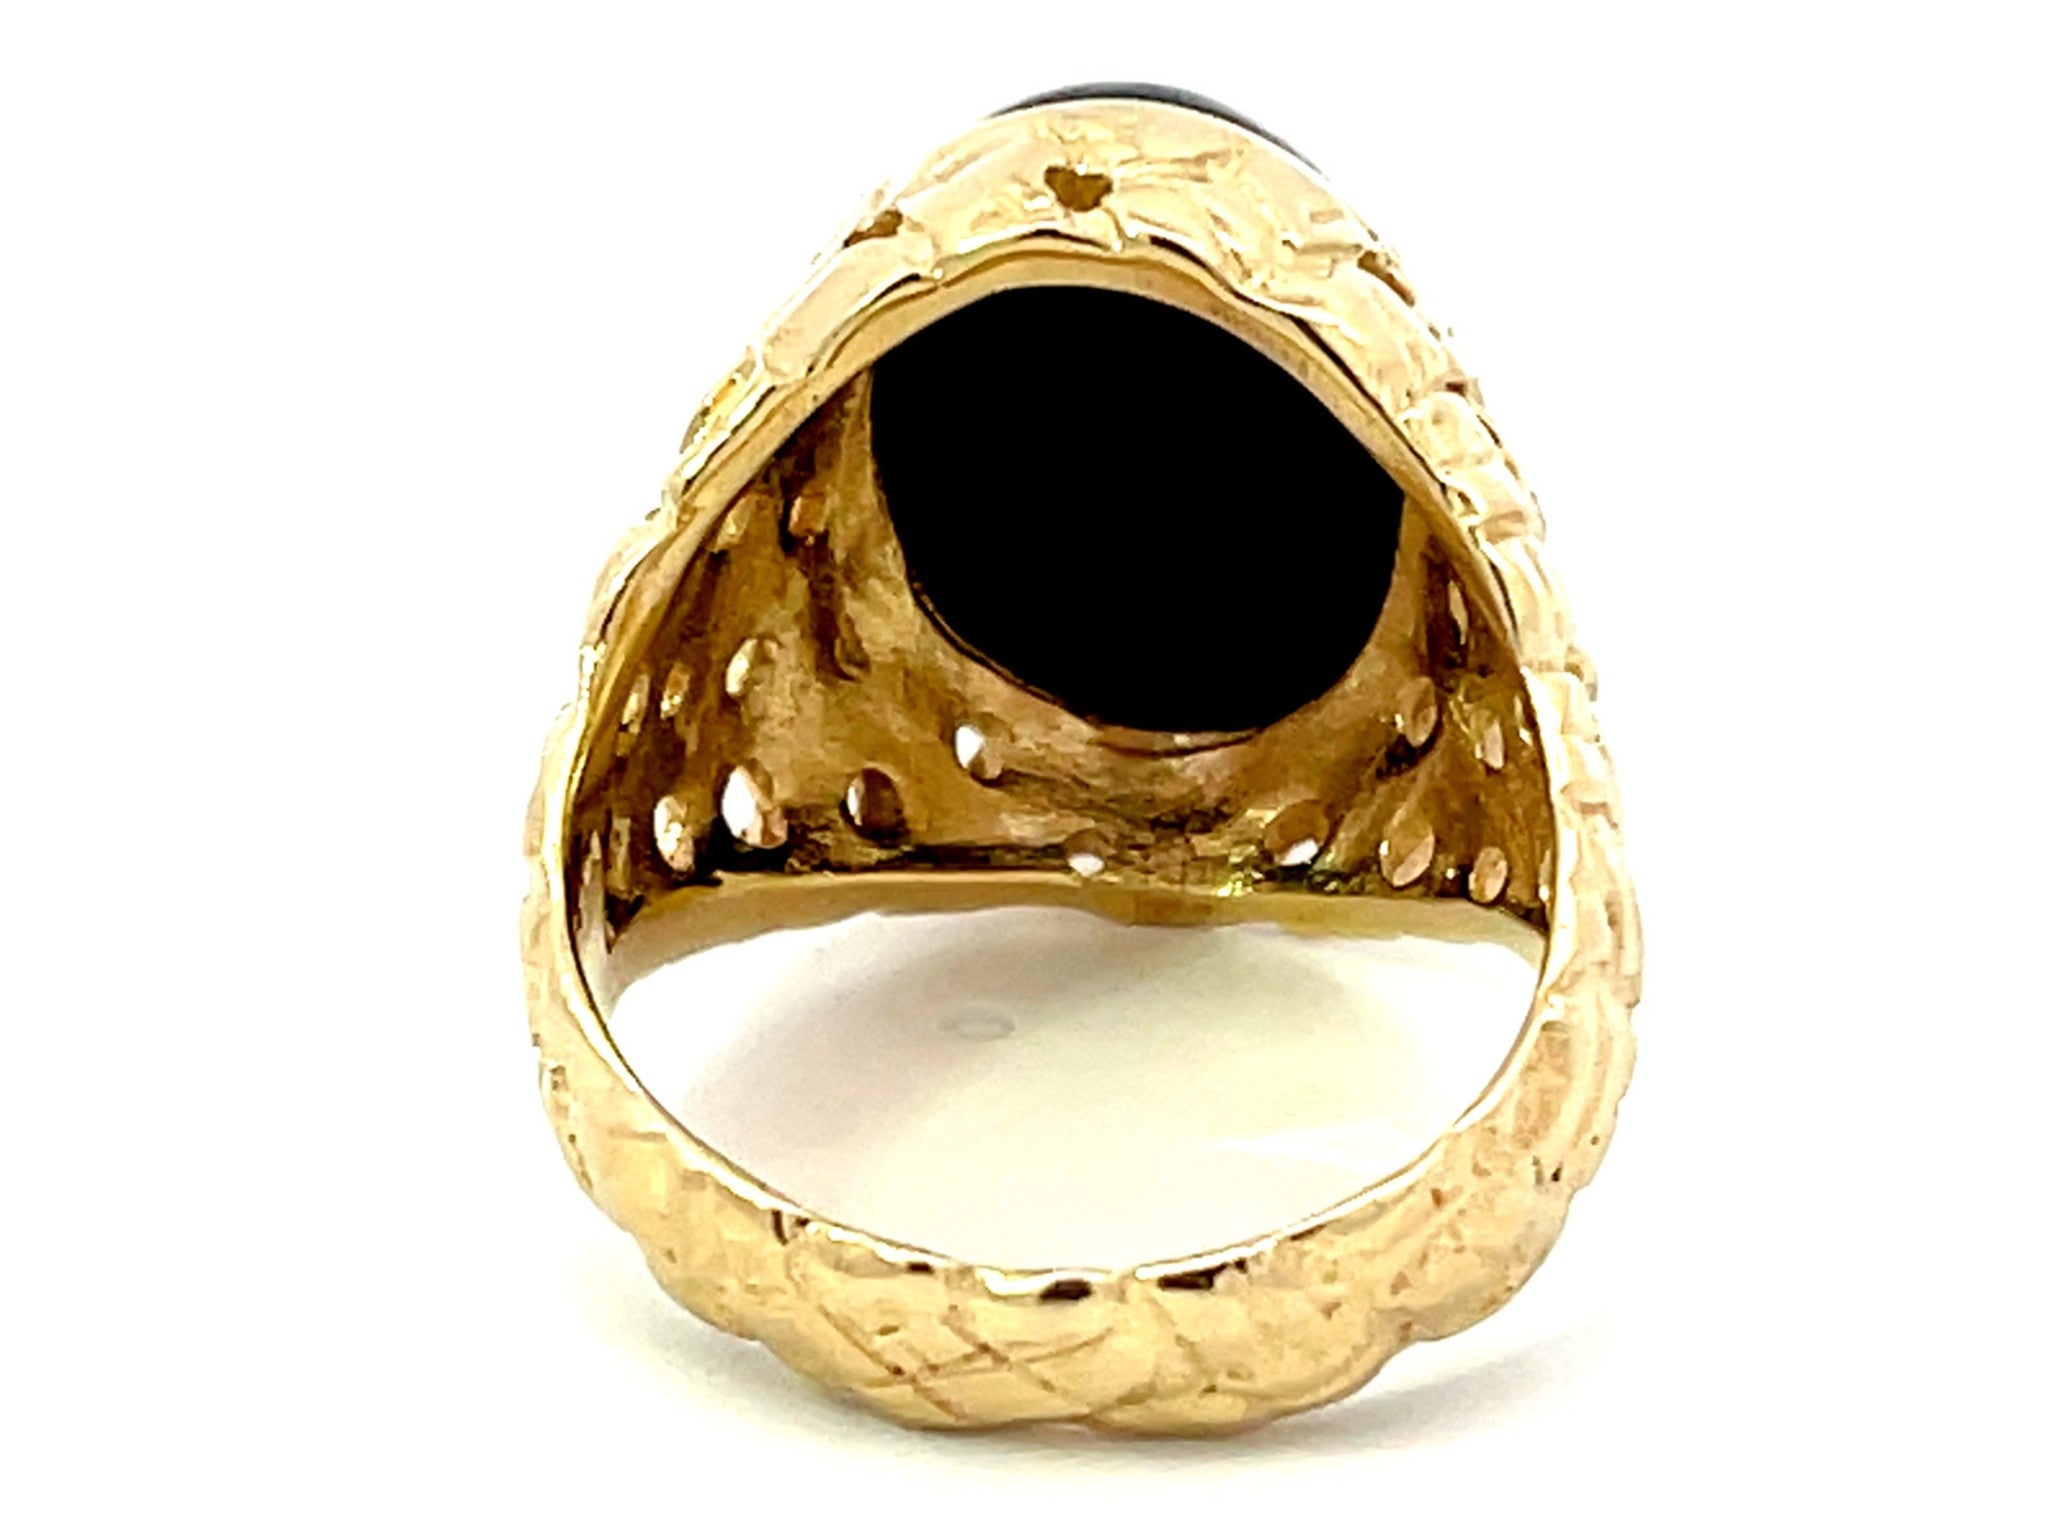 Black Oval Onyx Cabochon Ring in 14k Yellow Gold